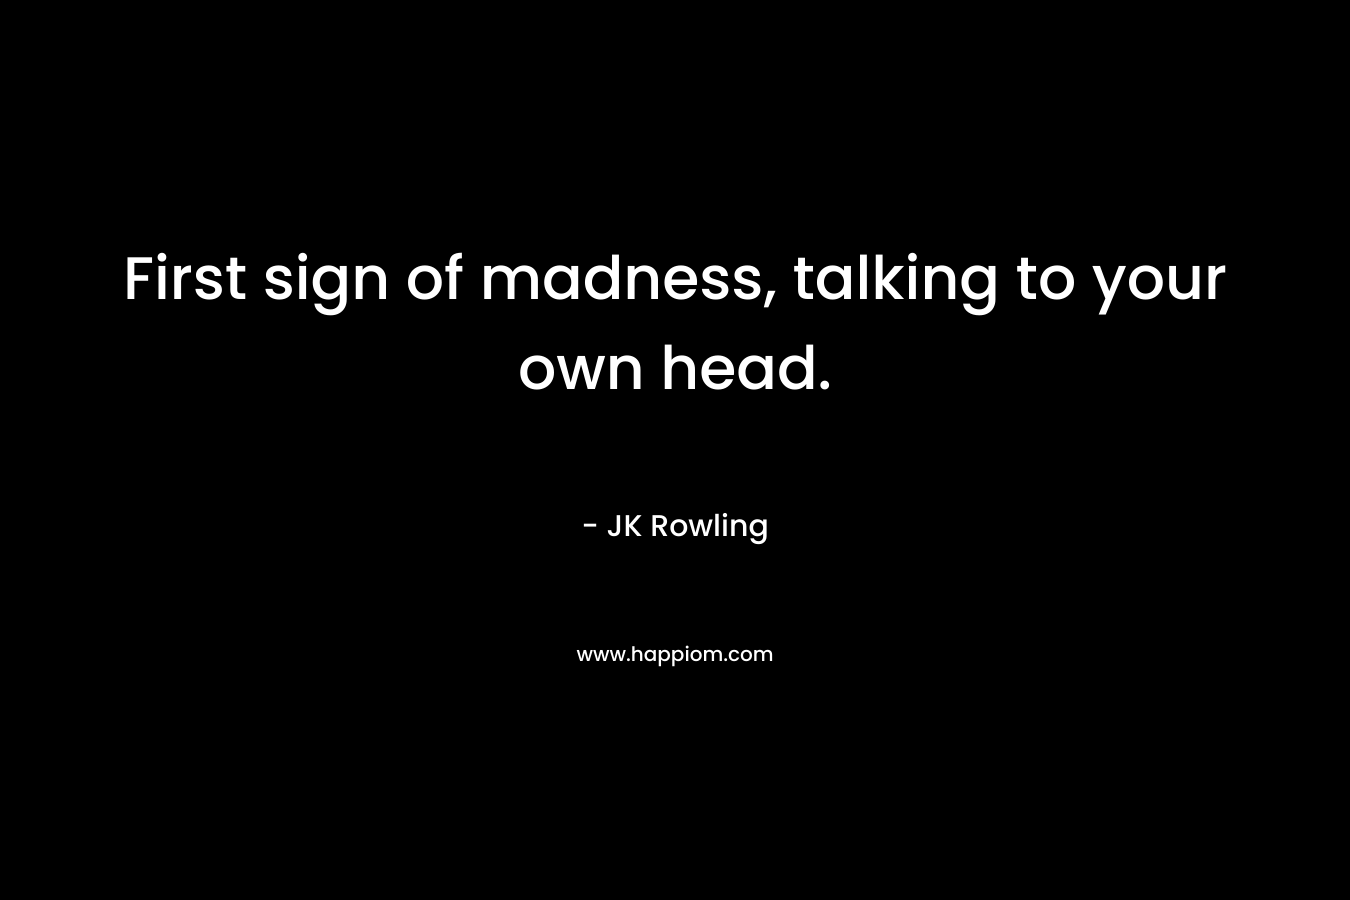 First sign of madness, talking to your own head. – JK Rowling